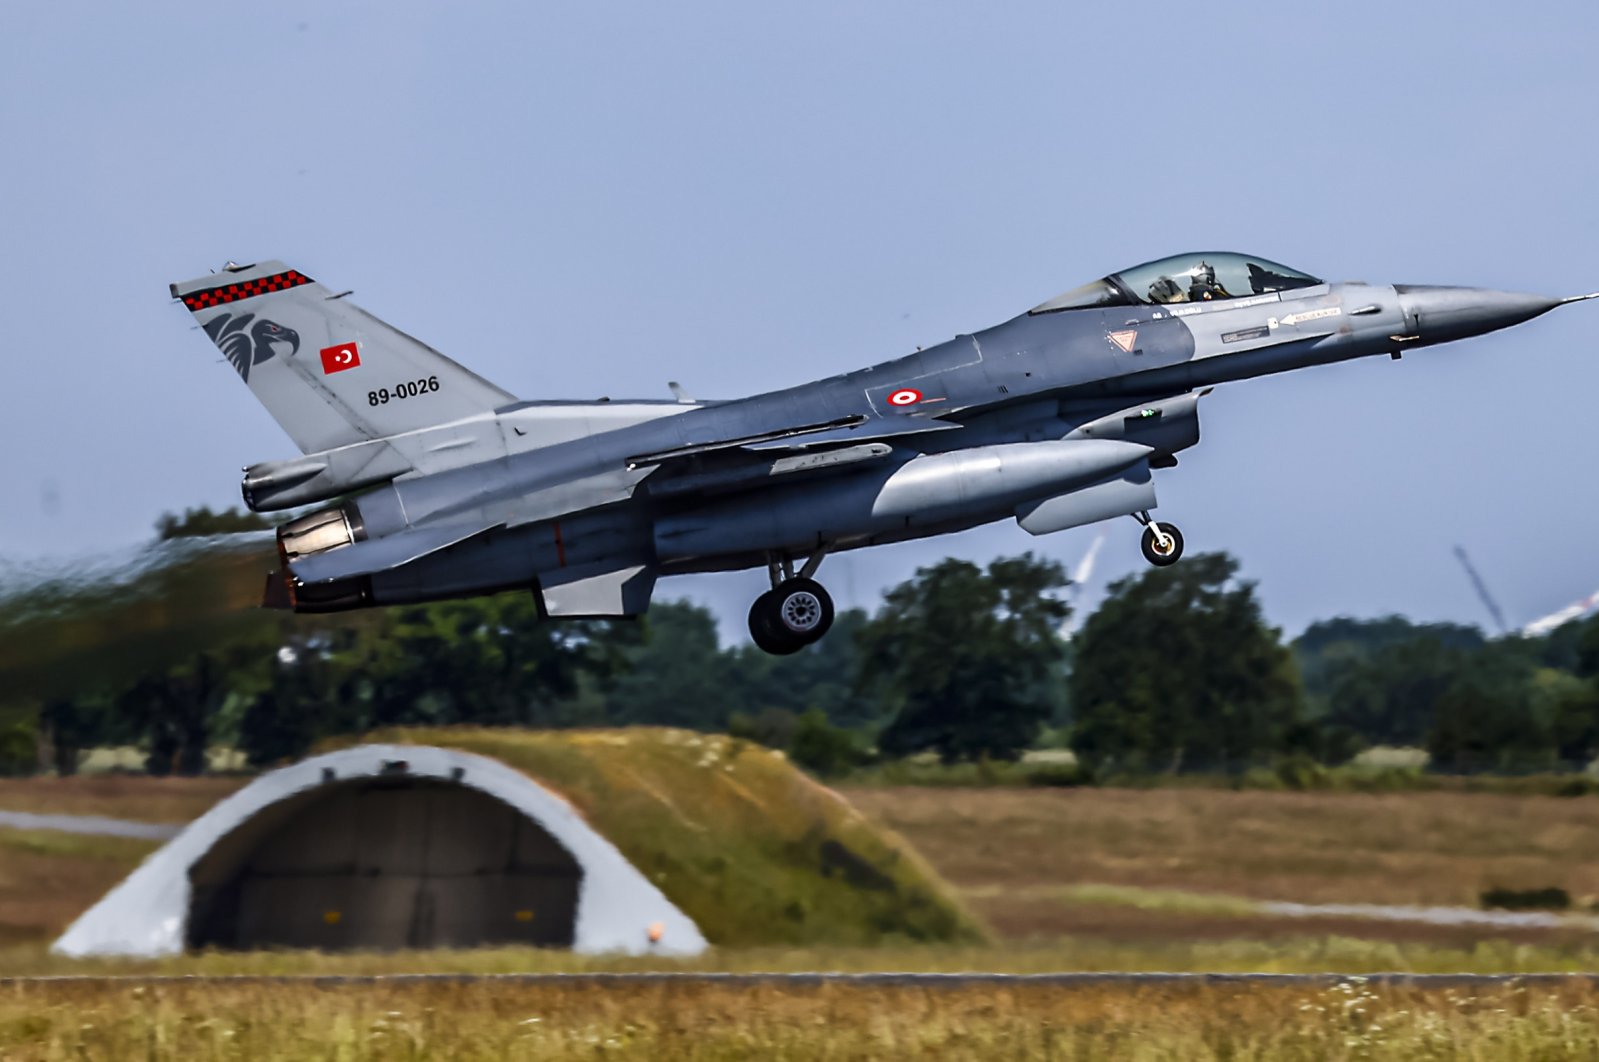 A Turkish Air Force F-16 takes off from the base of the 51 Tactical Air Wing Immelmann, during the NATO Air Defender 2023 exercise in Jagel, Germany, June 9, 2023. (EPA Photo)